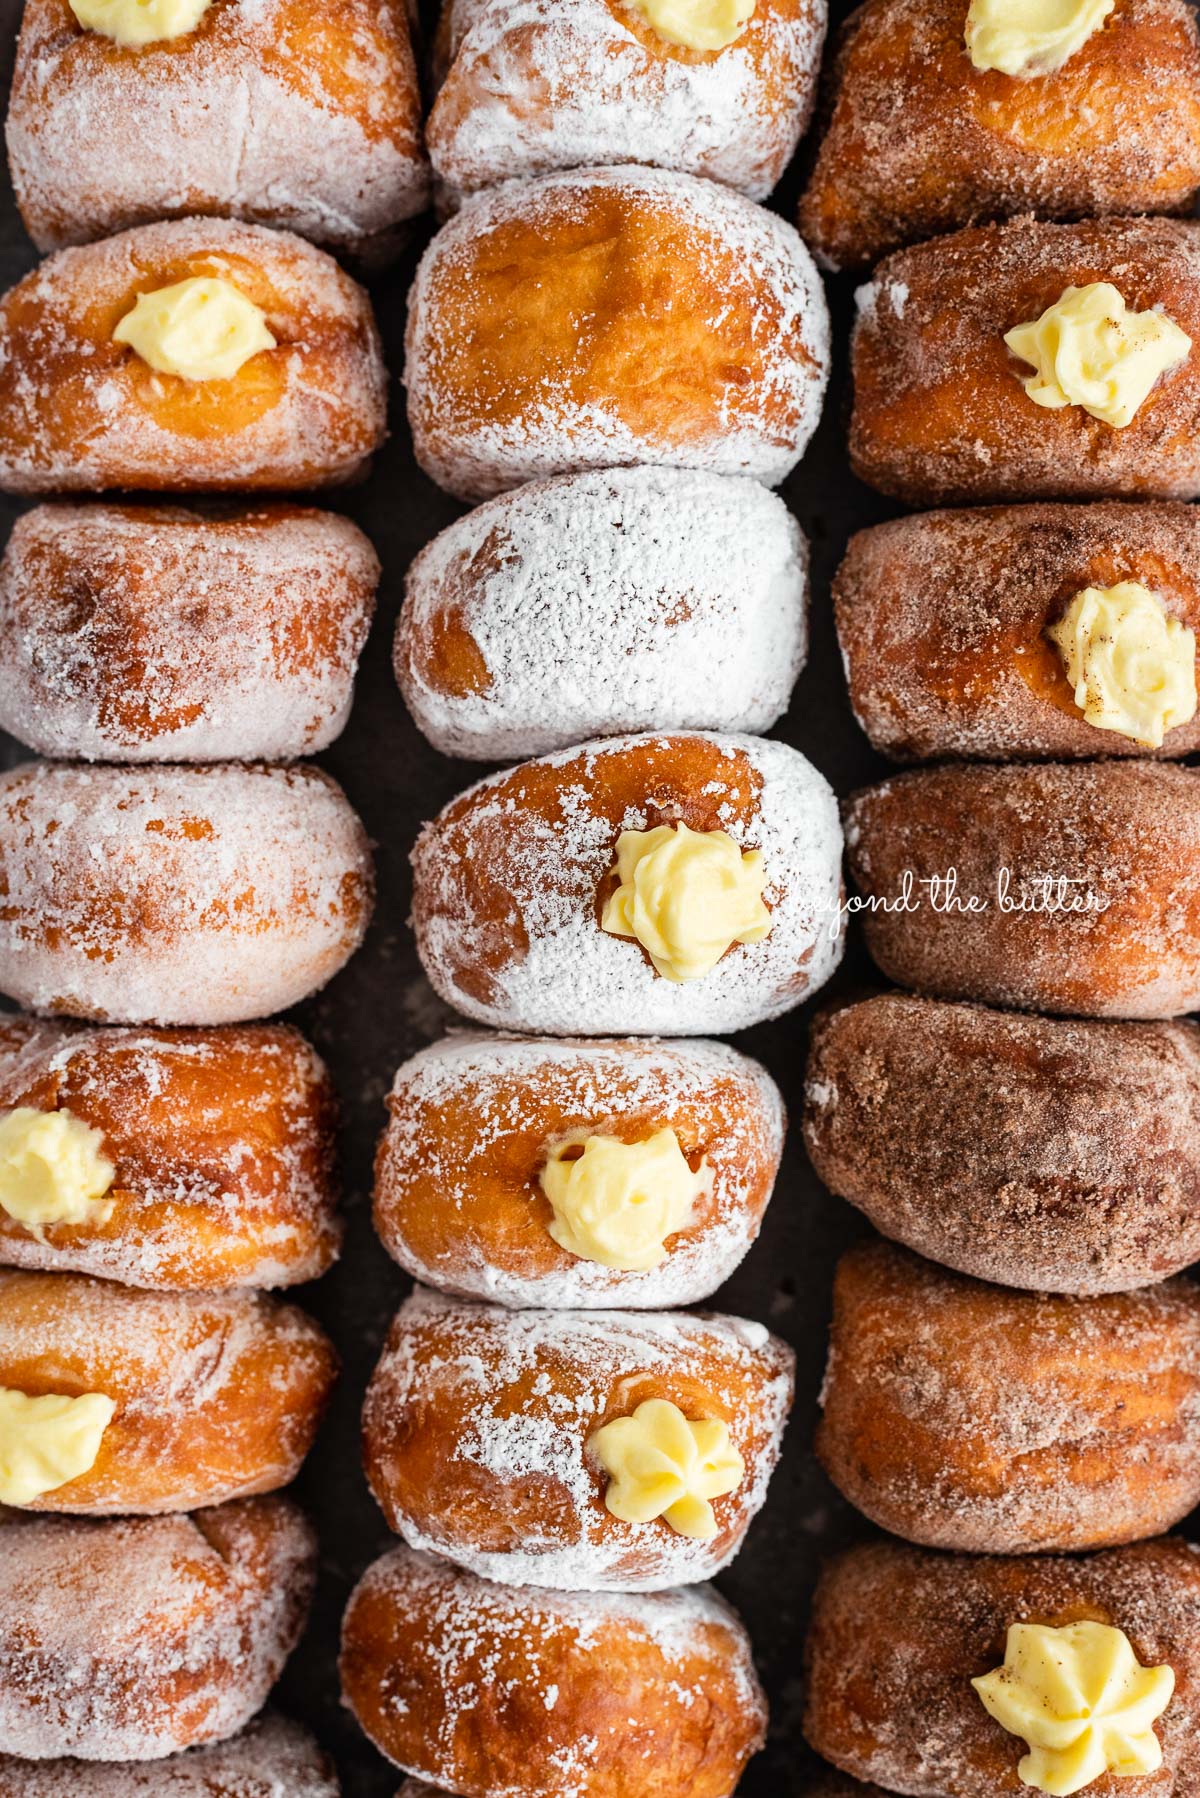 Rows of pennsylvania dutch fasnacht doughnuts filled with pastry cream.